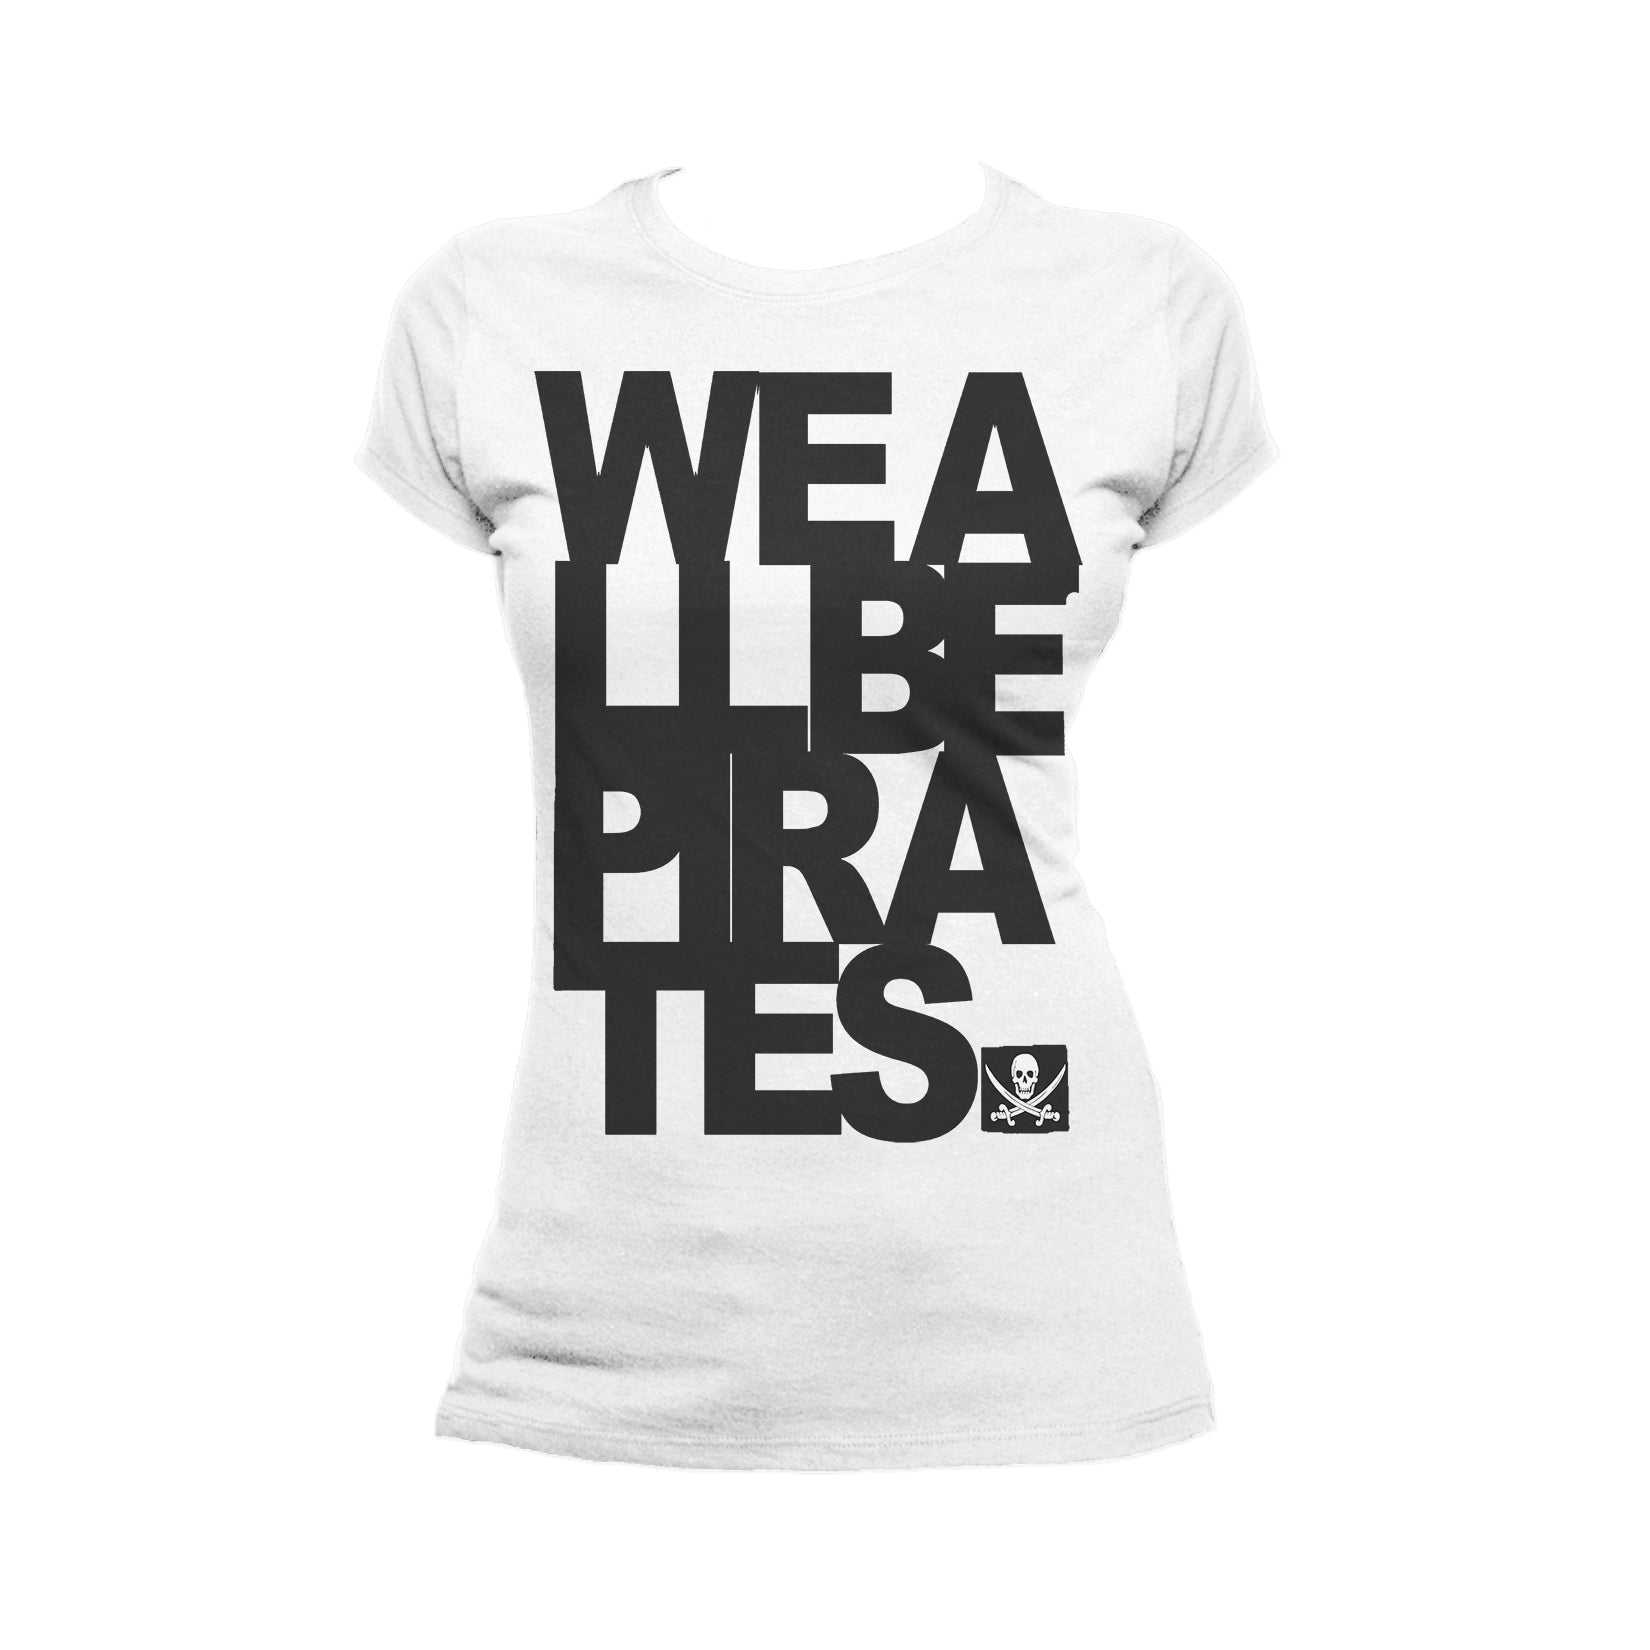 US Brand X Sci Funk We Be Pirates Official Women's T-Shirt (White)